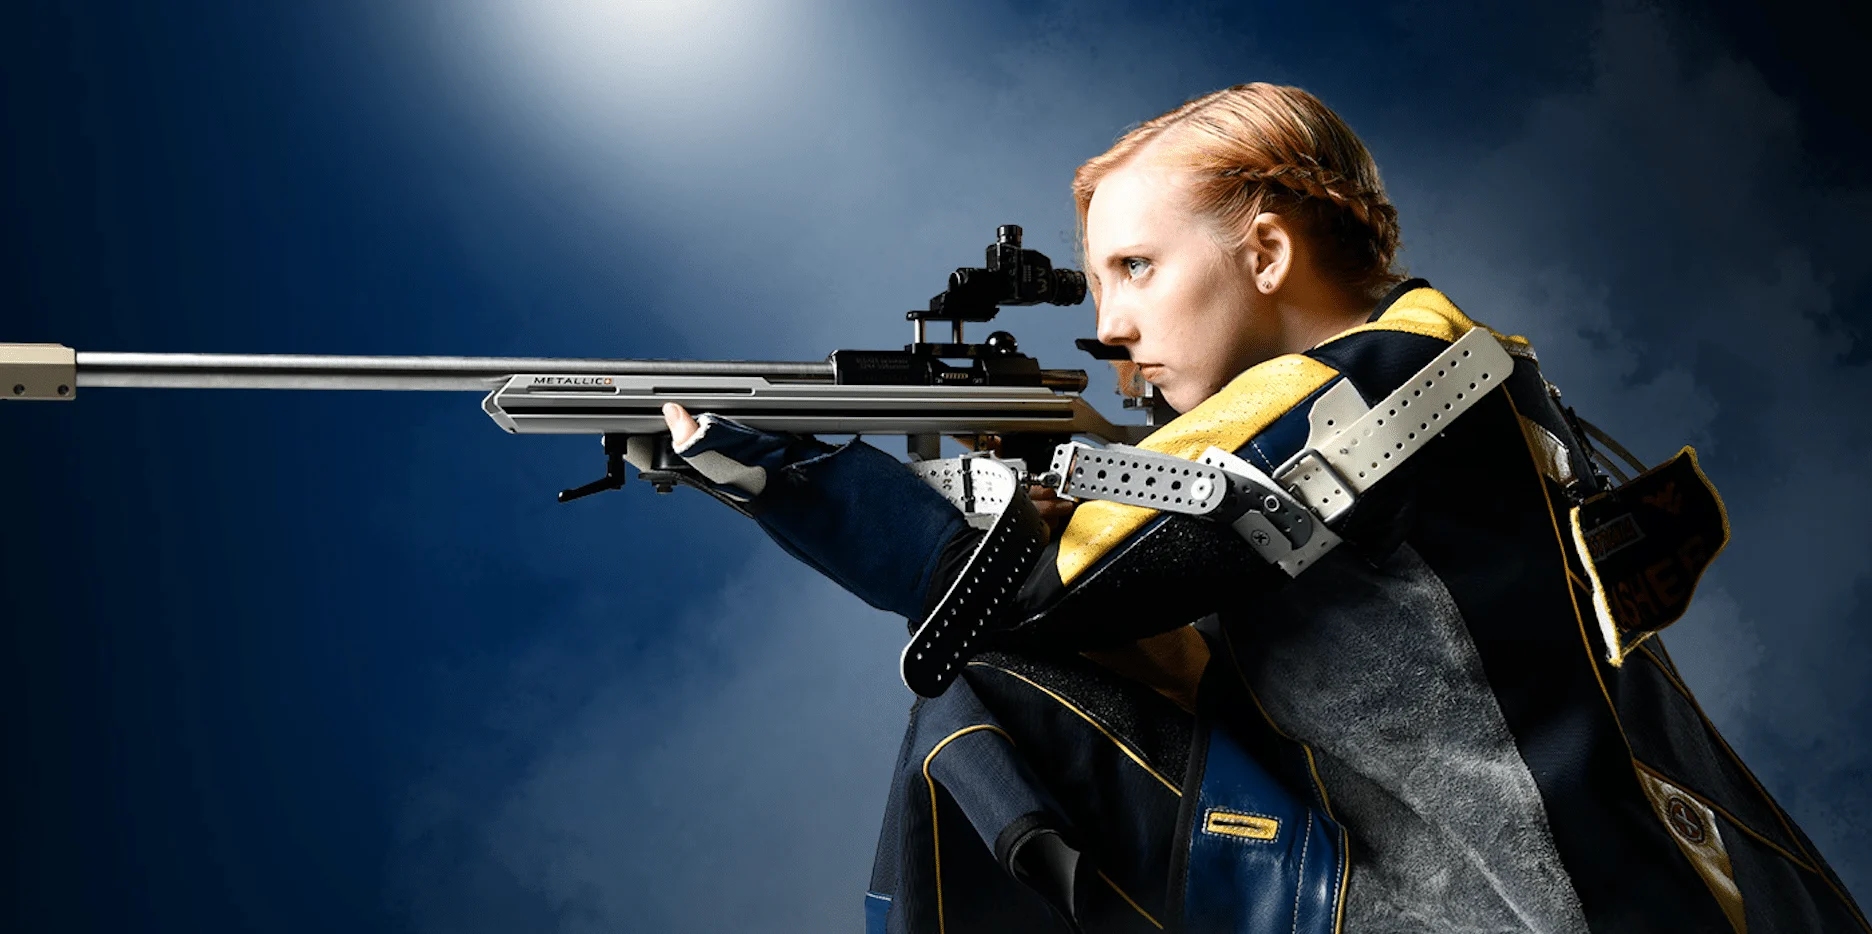 Podcast No. 37: Ginny Thrasher, Olympic Gold Medalist, Air Rifle